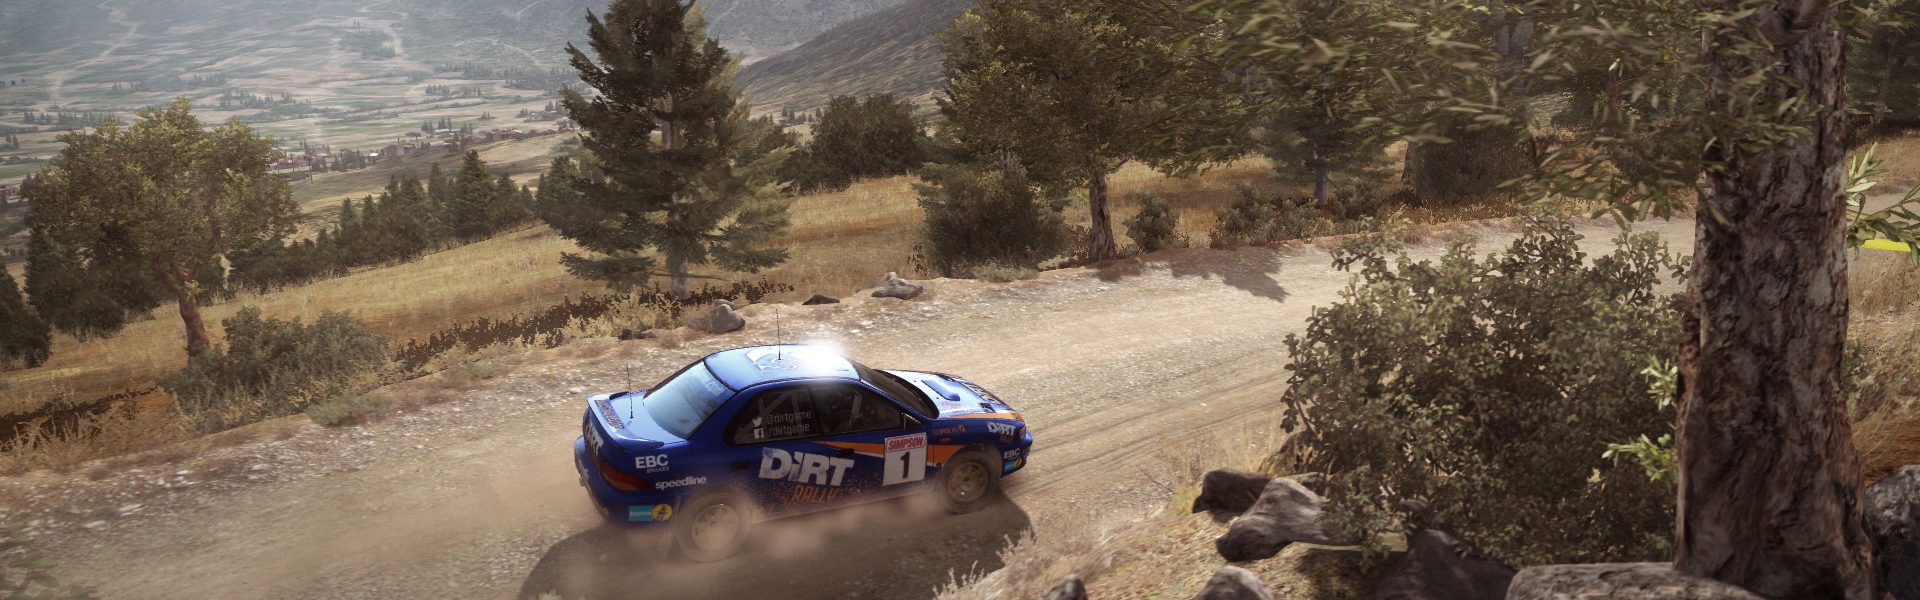 dirt rally ps4 vr